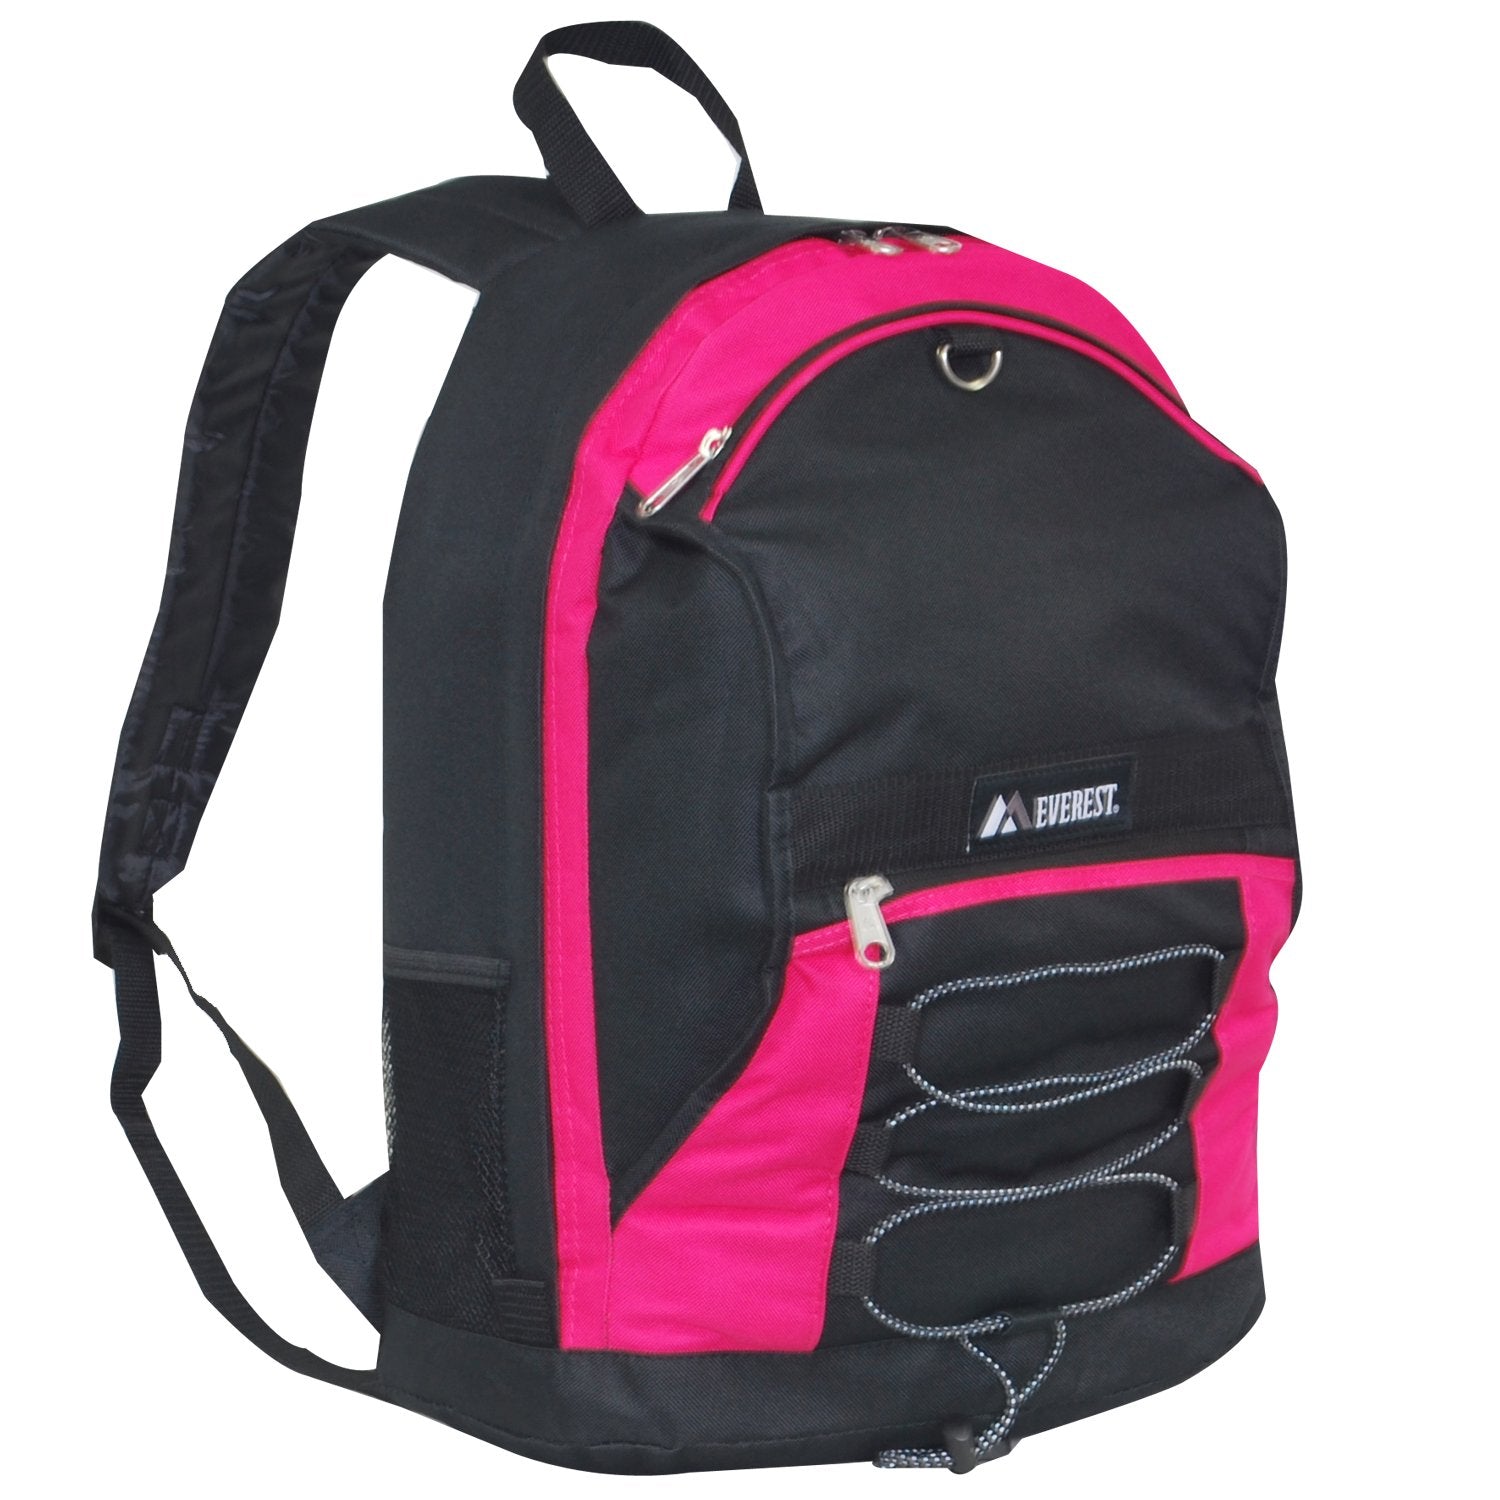 Everest-Two-Tone Backpack w/ Mesh Pockets-eSafety Supplies, Inc